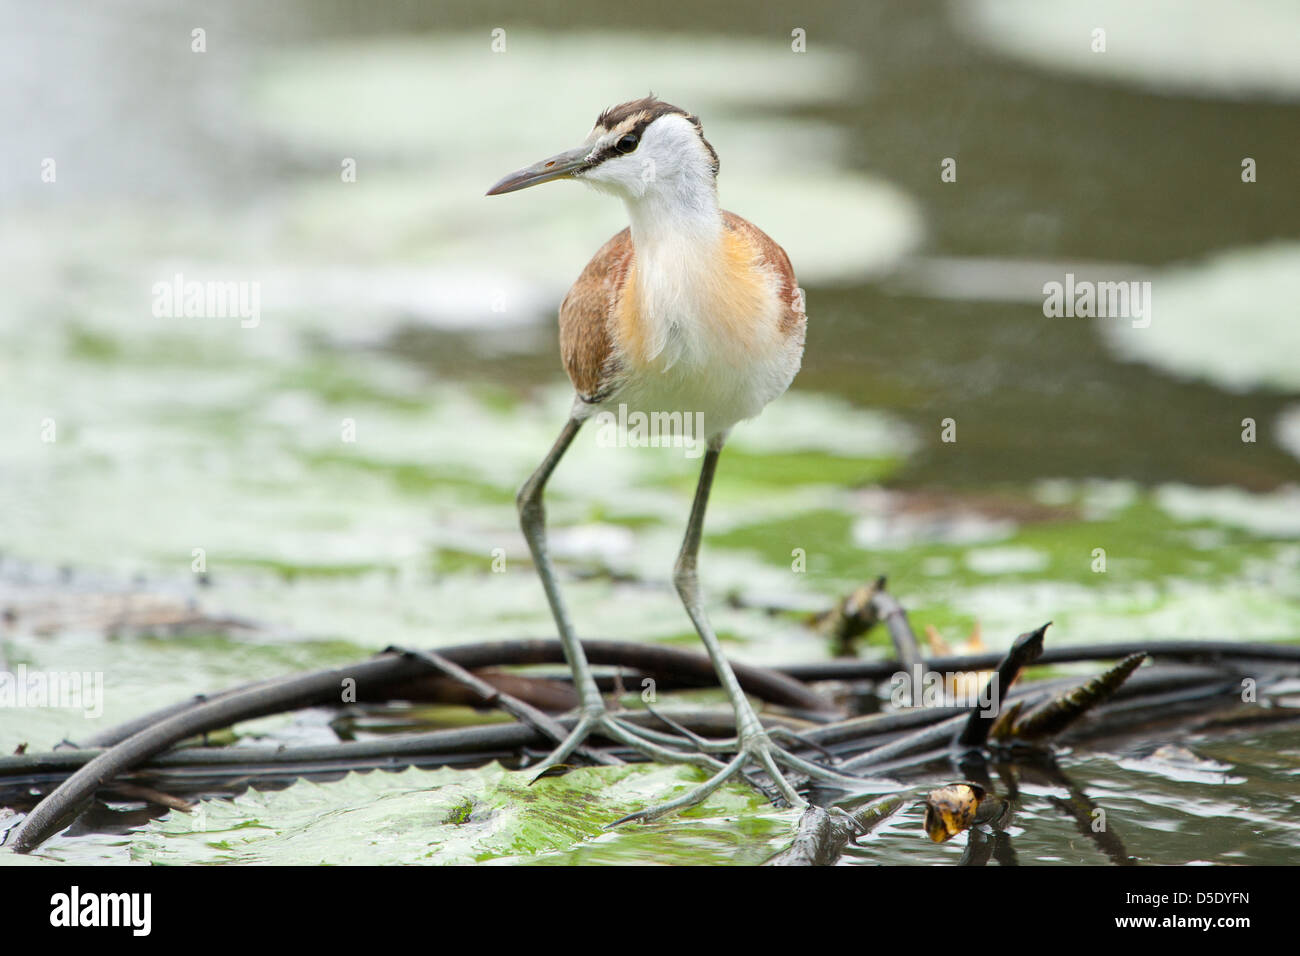 A female African Jacana standing on a lily pad Stock Photo